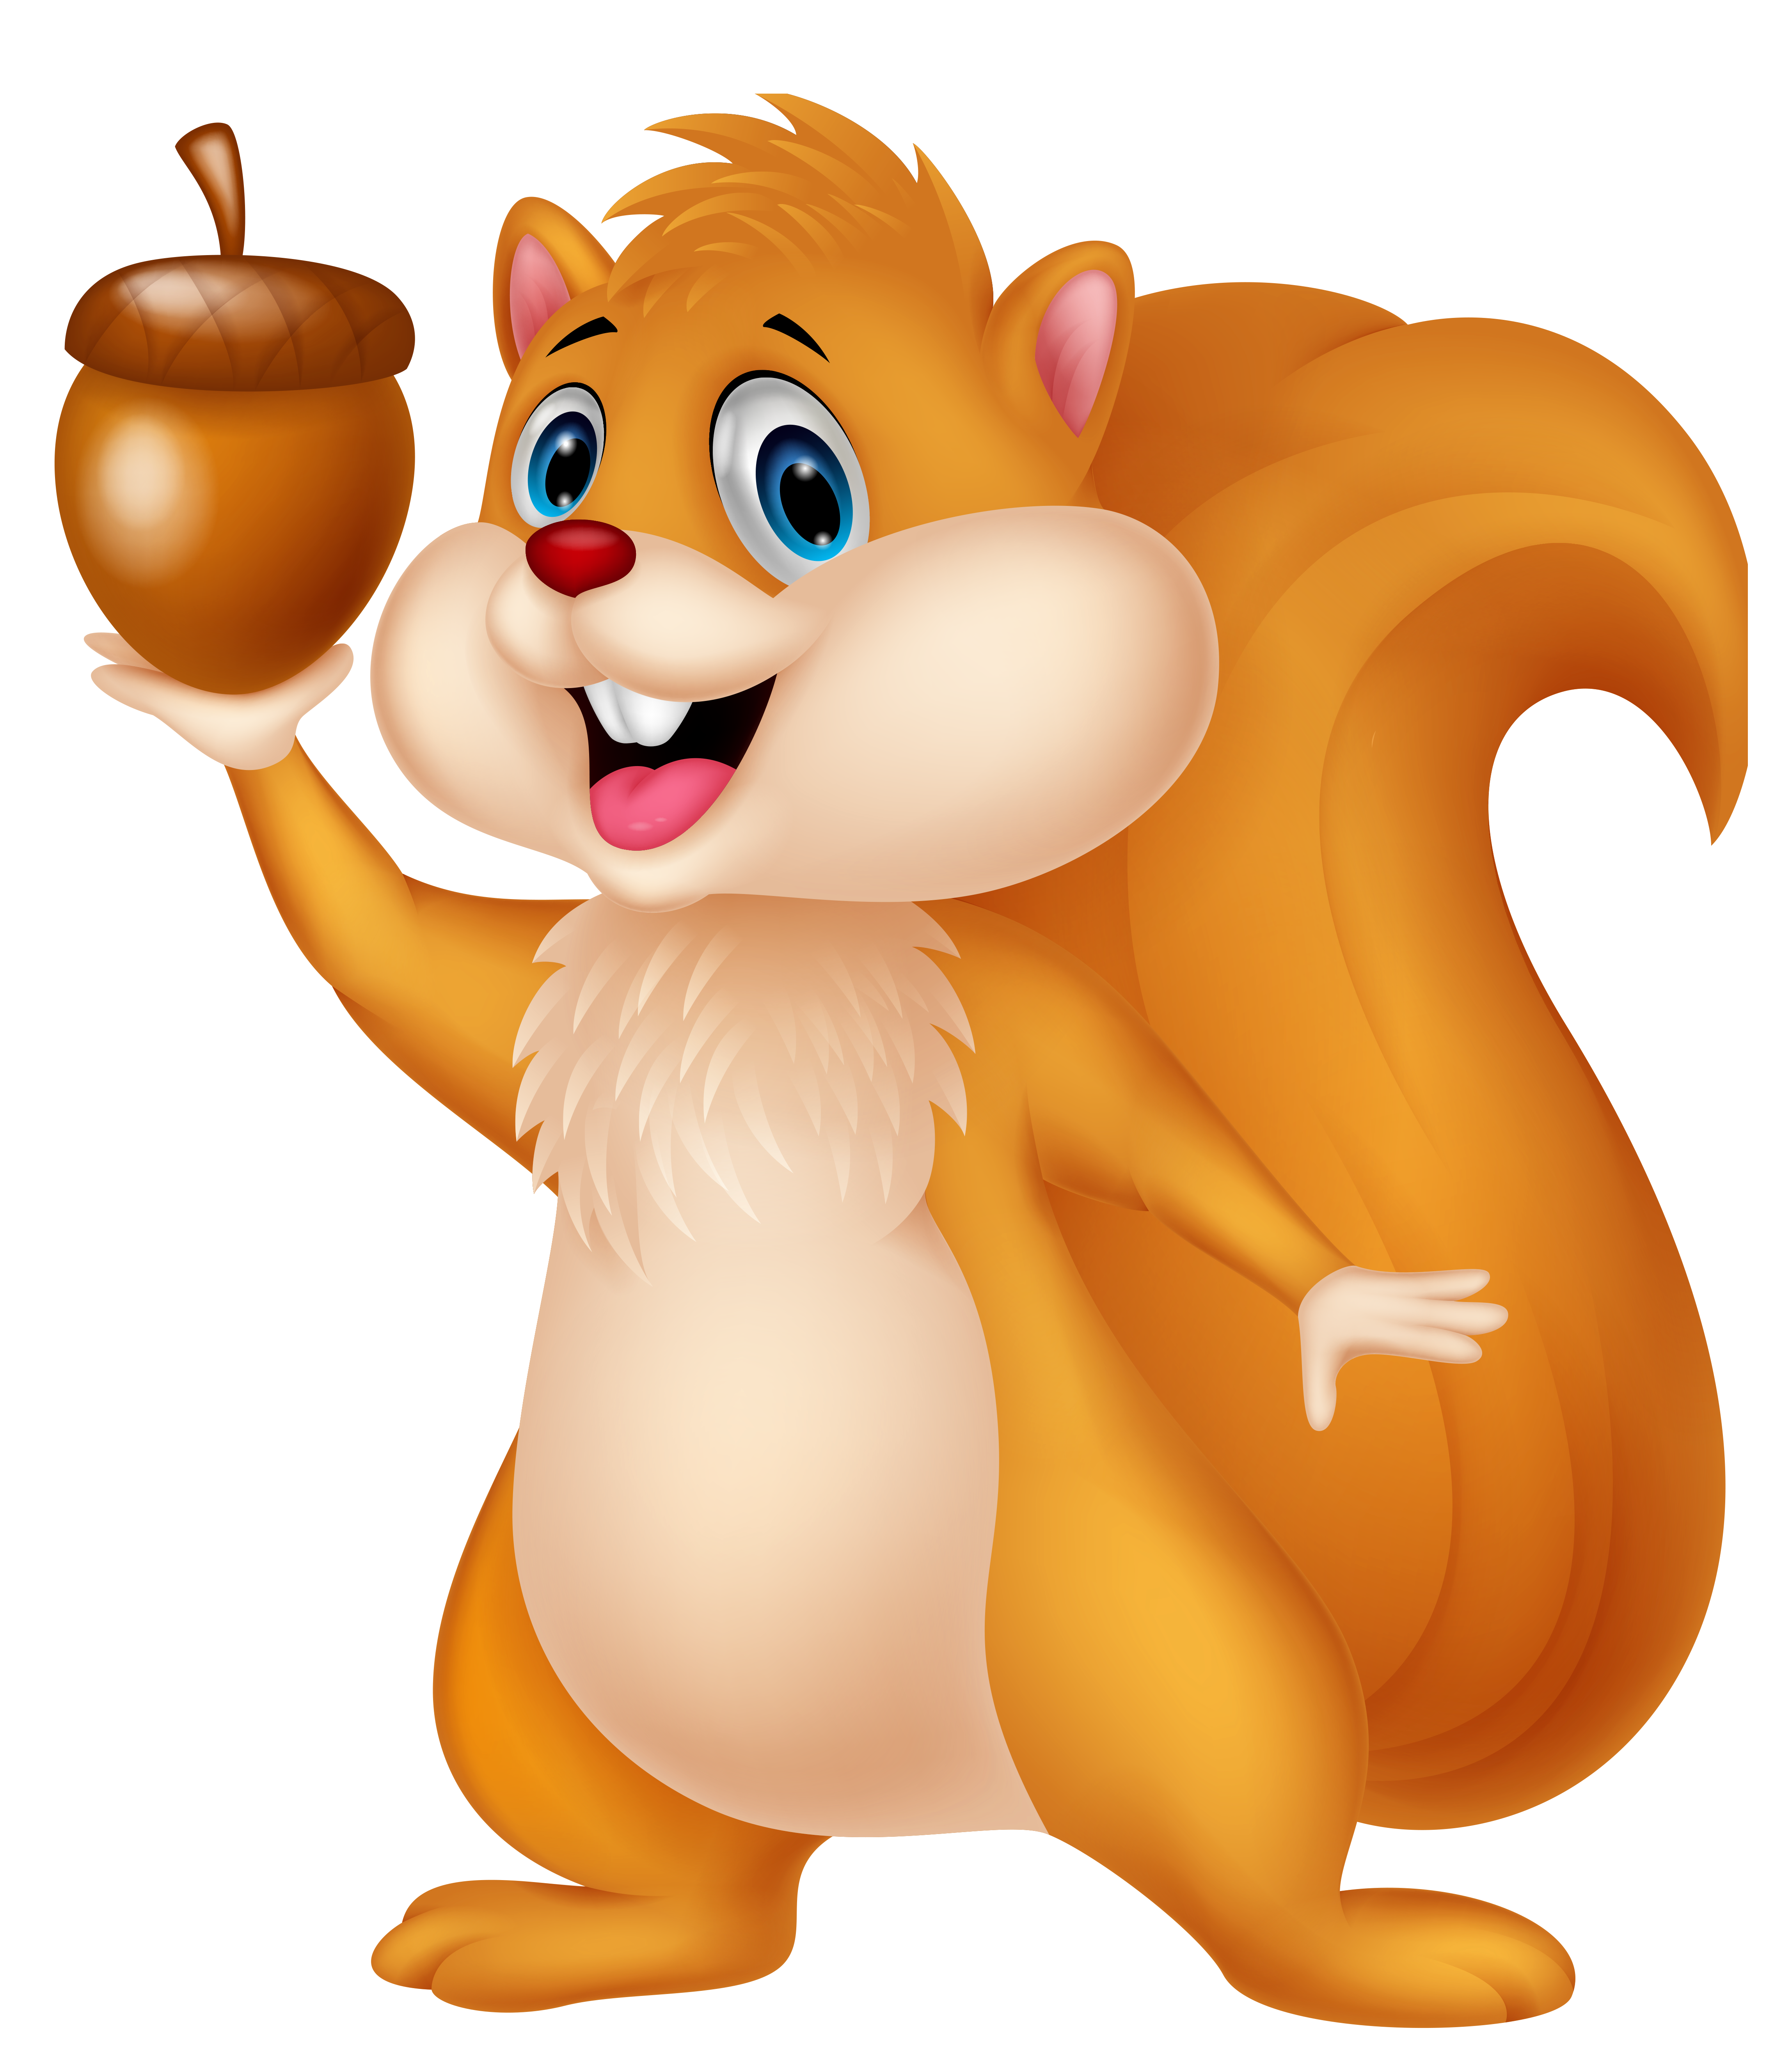 Cute Squirrel with Acorn PNG Cartoon Clipart.